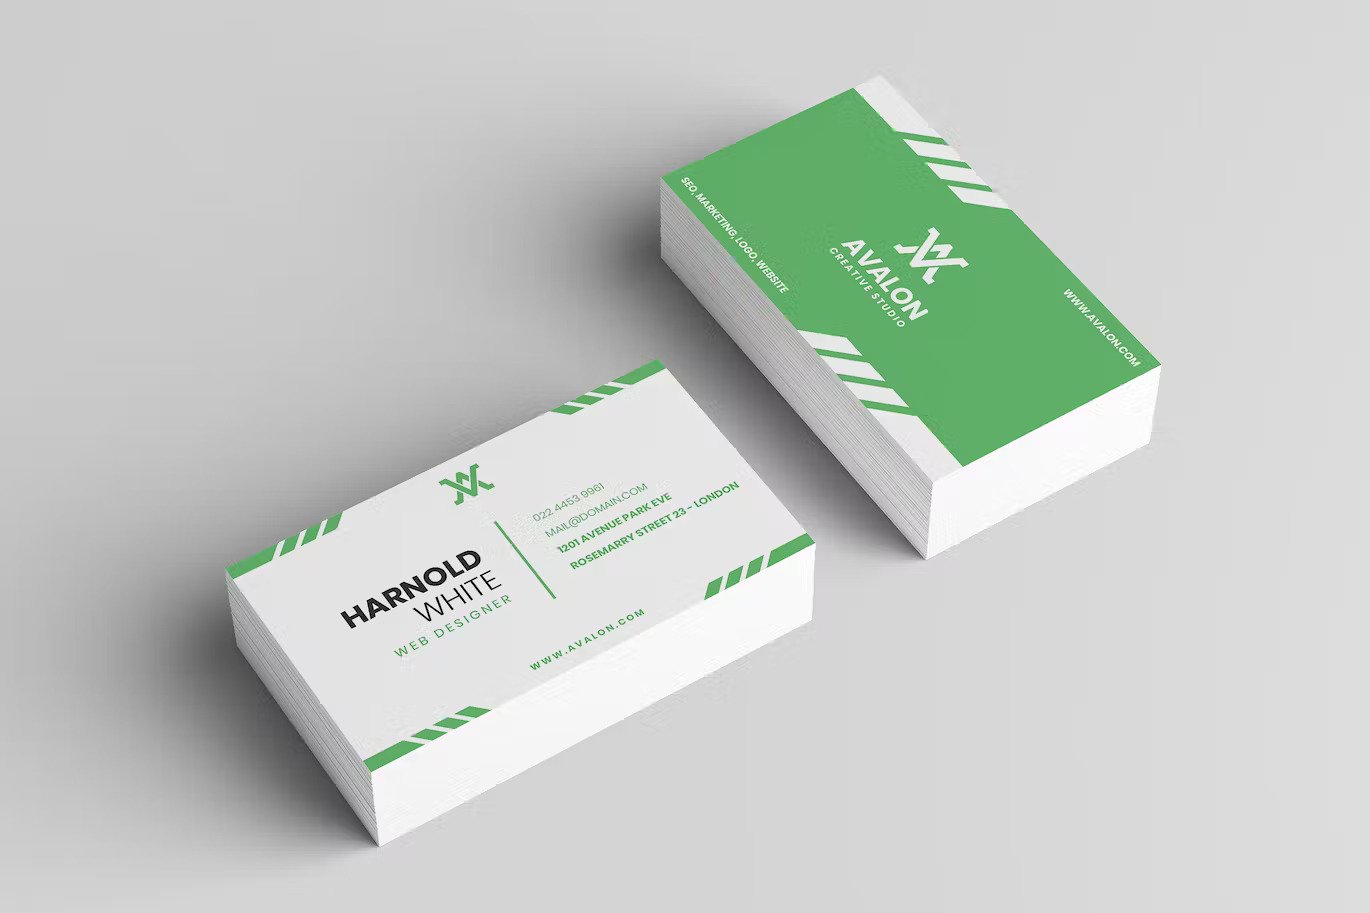 A simple business card template